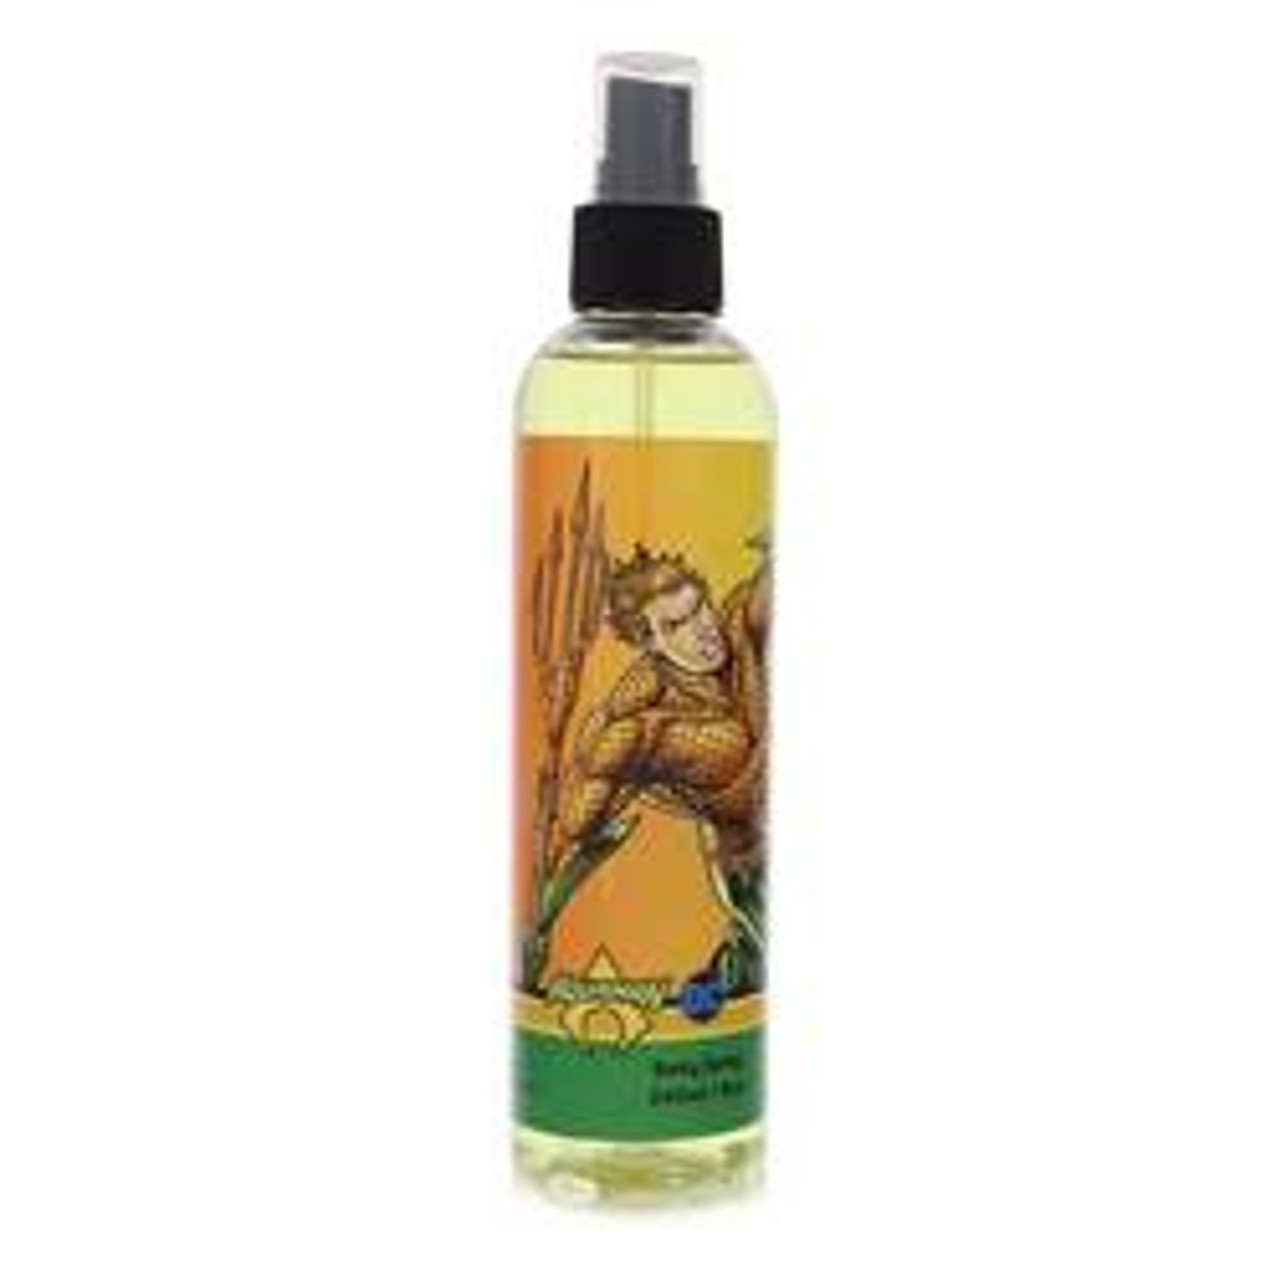 Dc Comics Aquaman Cologne By Marmol & Son Body Spray 8 oz for Men - [From 31.00 - Choose pk Qty ] - *Ships from Miami